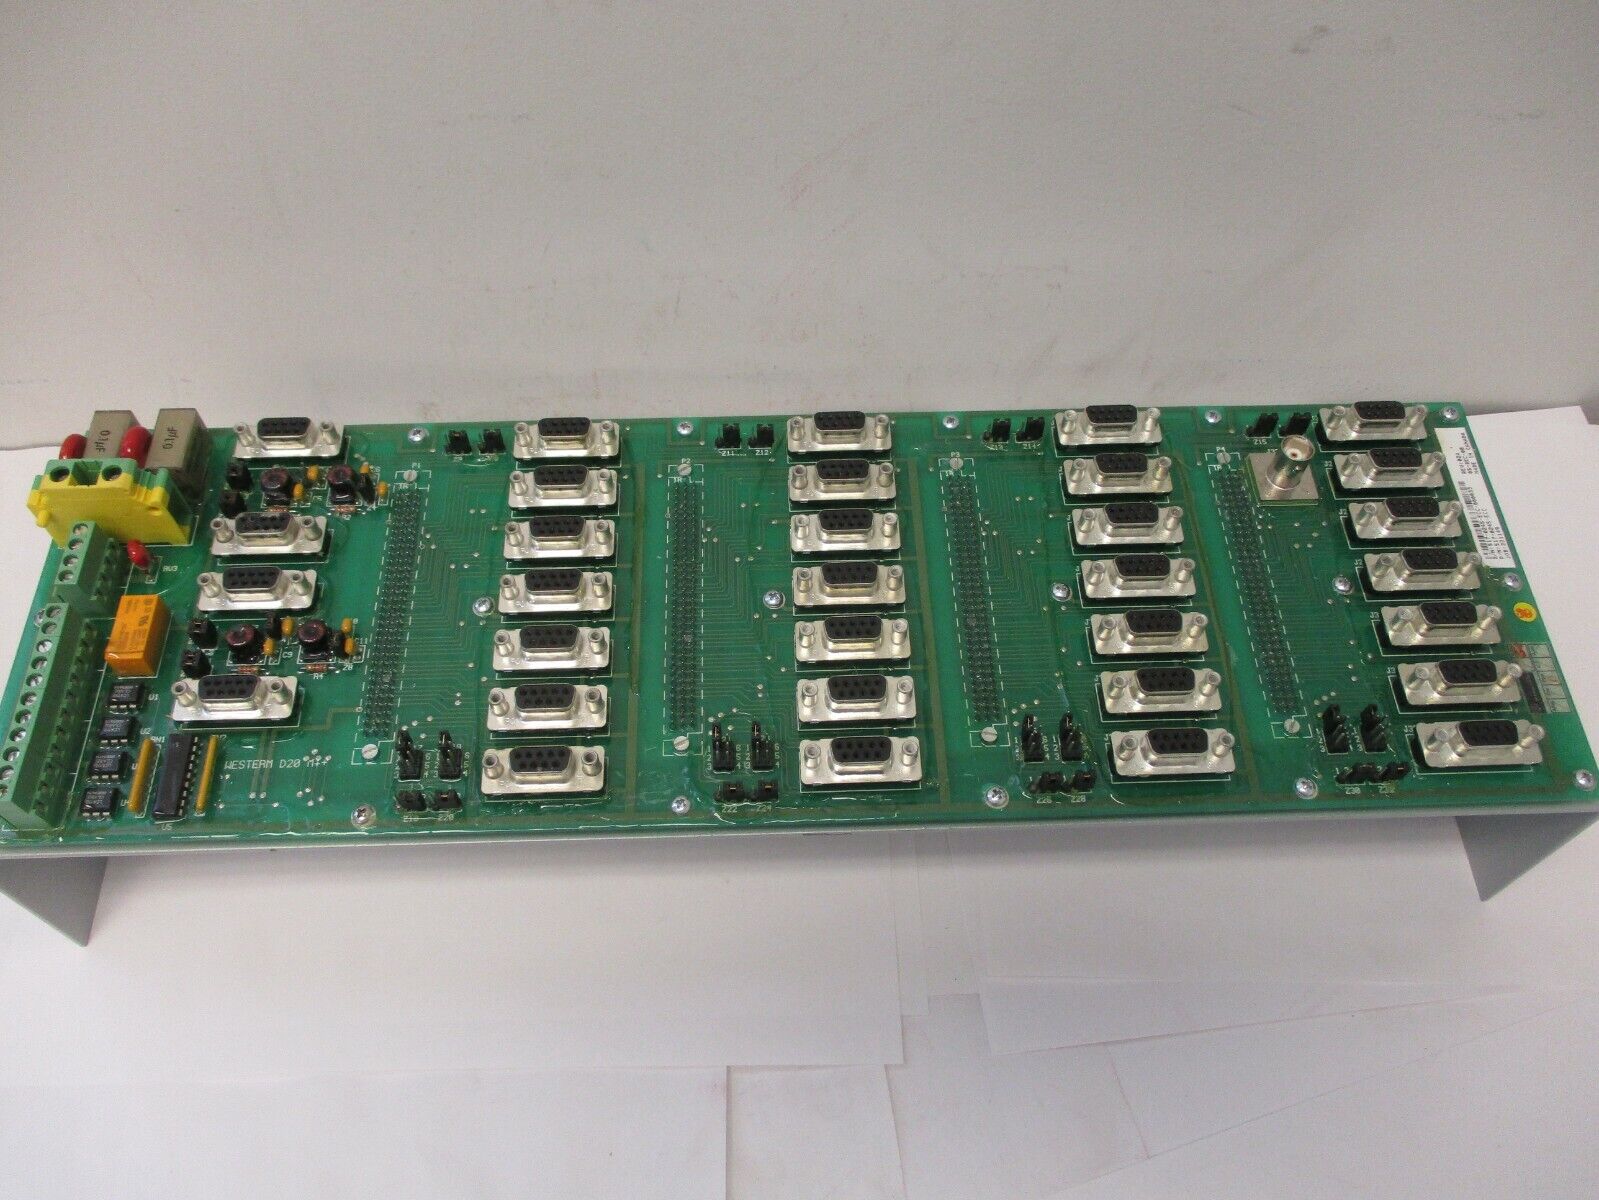 GE ENERGY SERVICES P/N 517-0245-ECC MOUNTED CIRCUIT BOARD AND CONNECTIONS